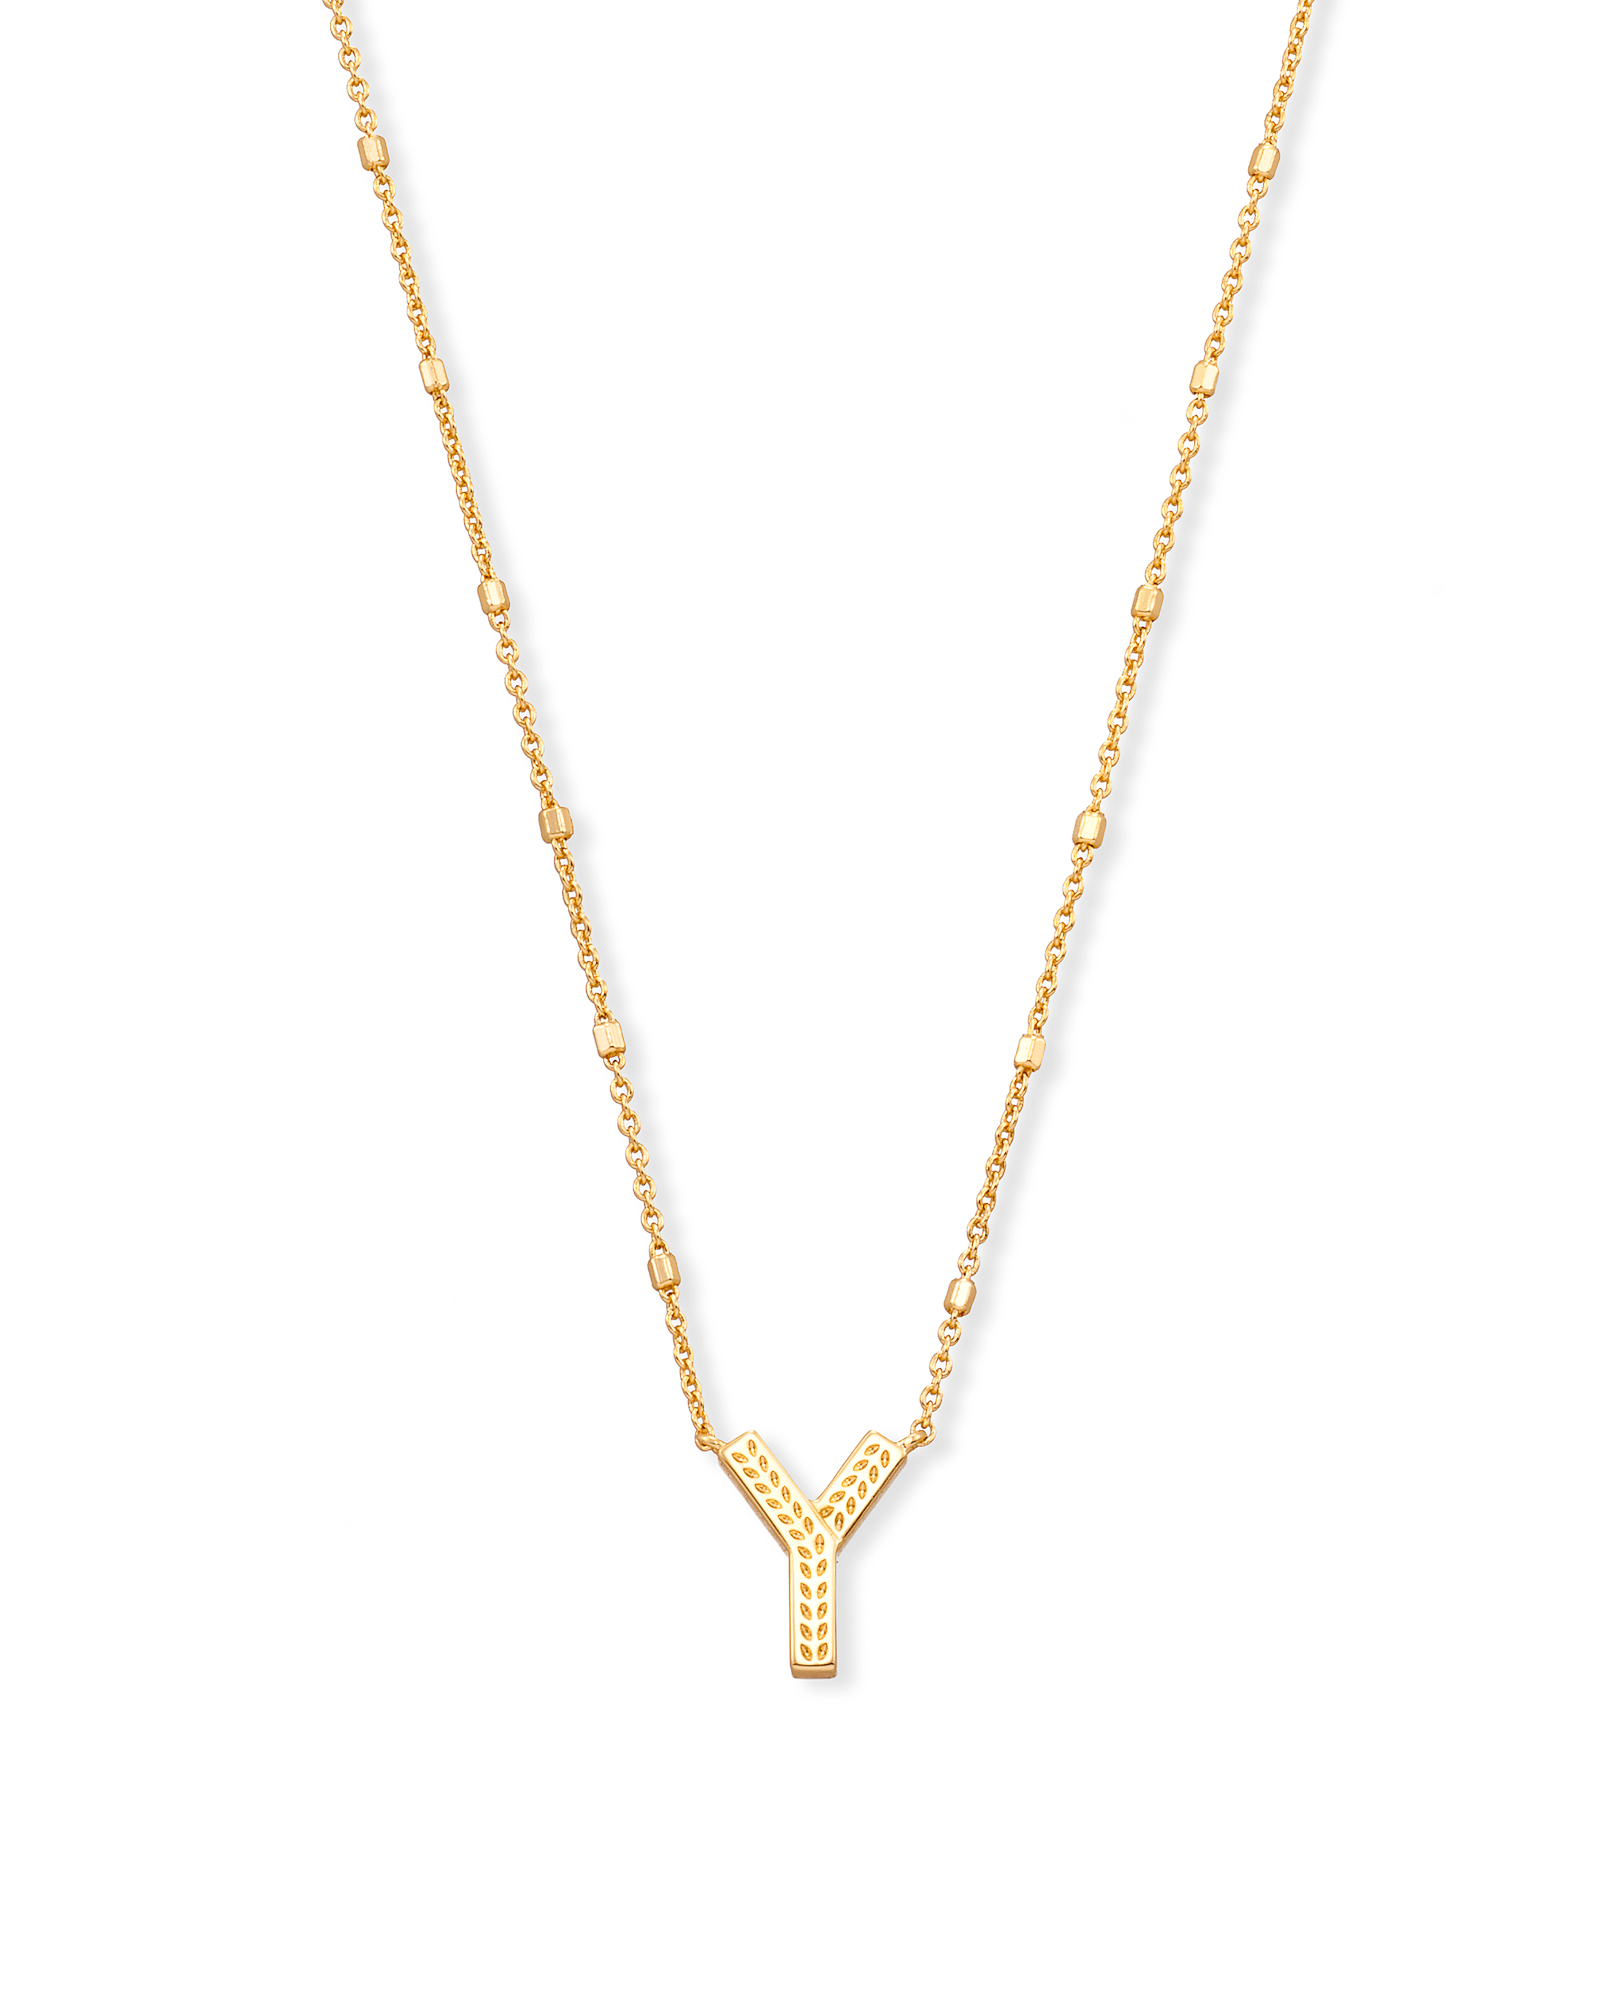 Letter Y Pendant Necklace in Gold | Kendra Scott